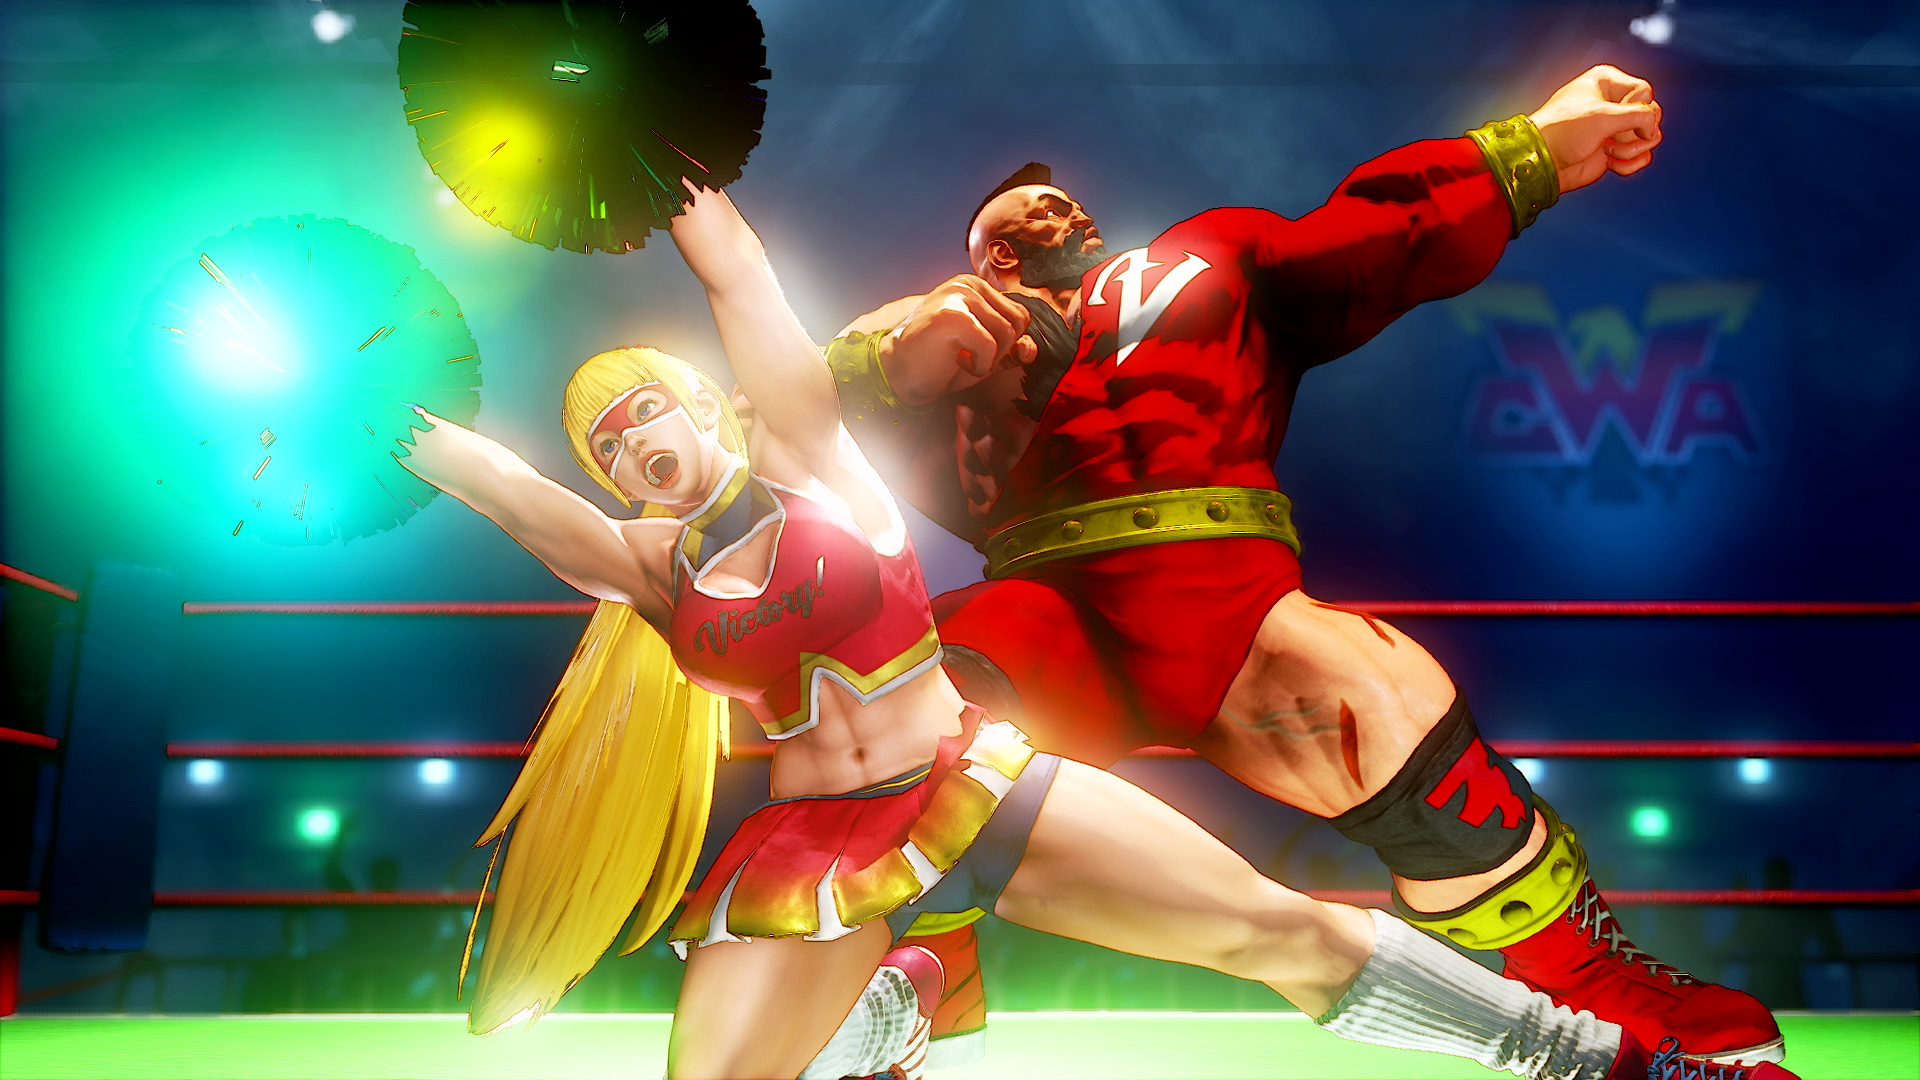 Street Fighter 5 Summer Update 2021 Reveals Release Date for Oro and Akira,  Luke is the Final Character for Season 5 - MP1st